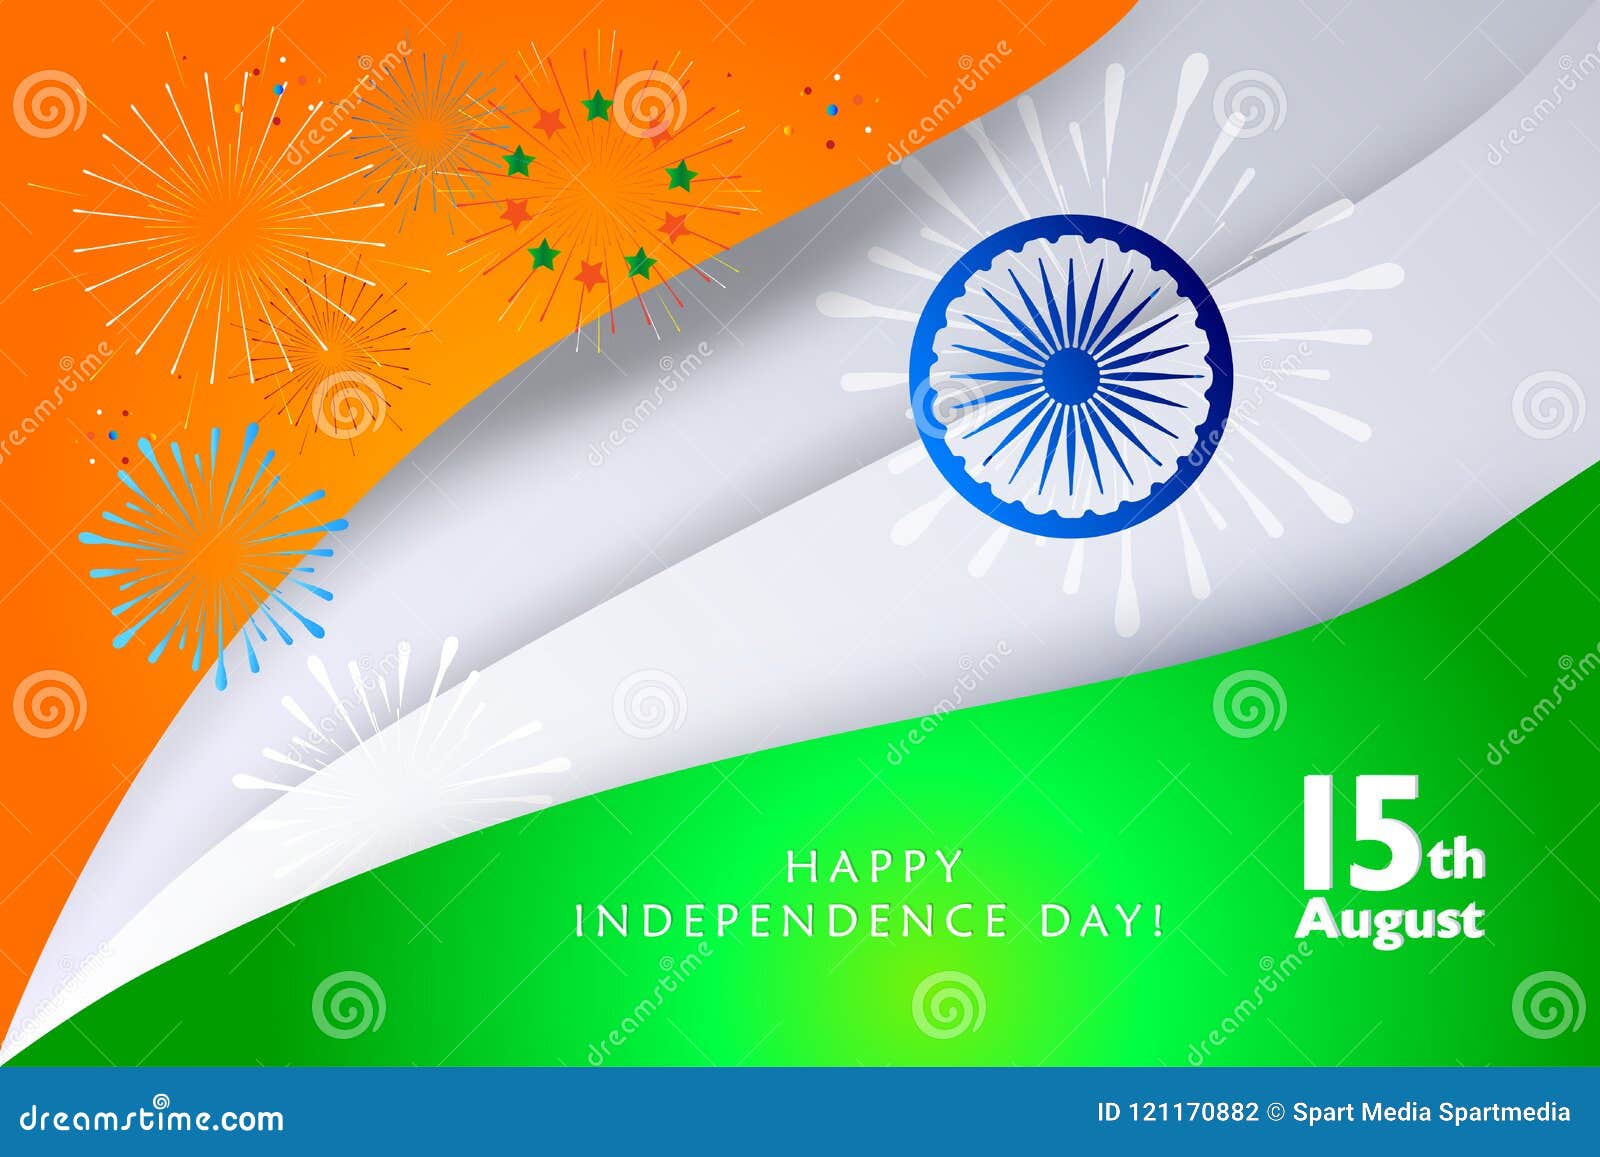 17 Indian Independence Day Free ECards ideas  invitation cards indian independence  day invitations